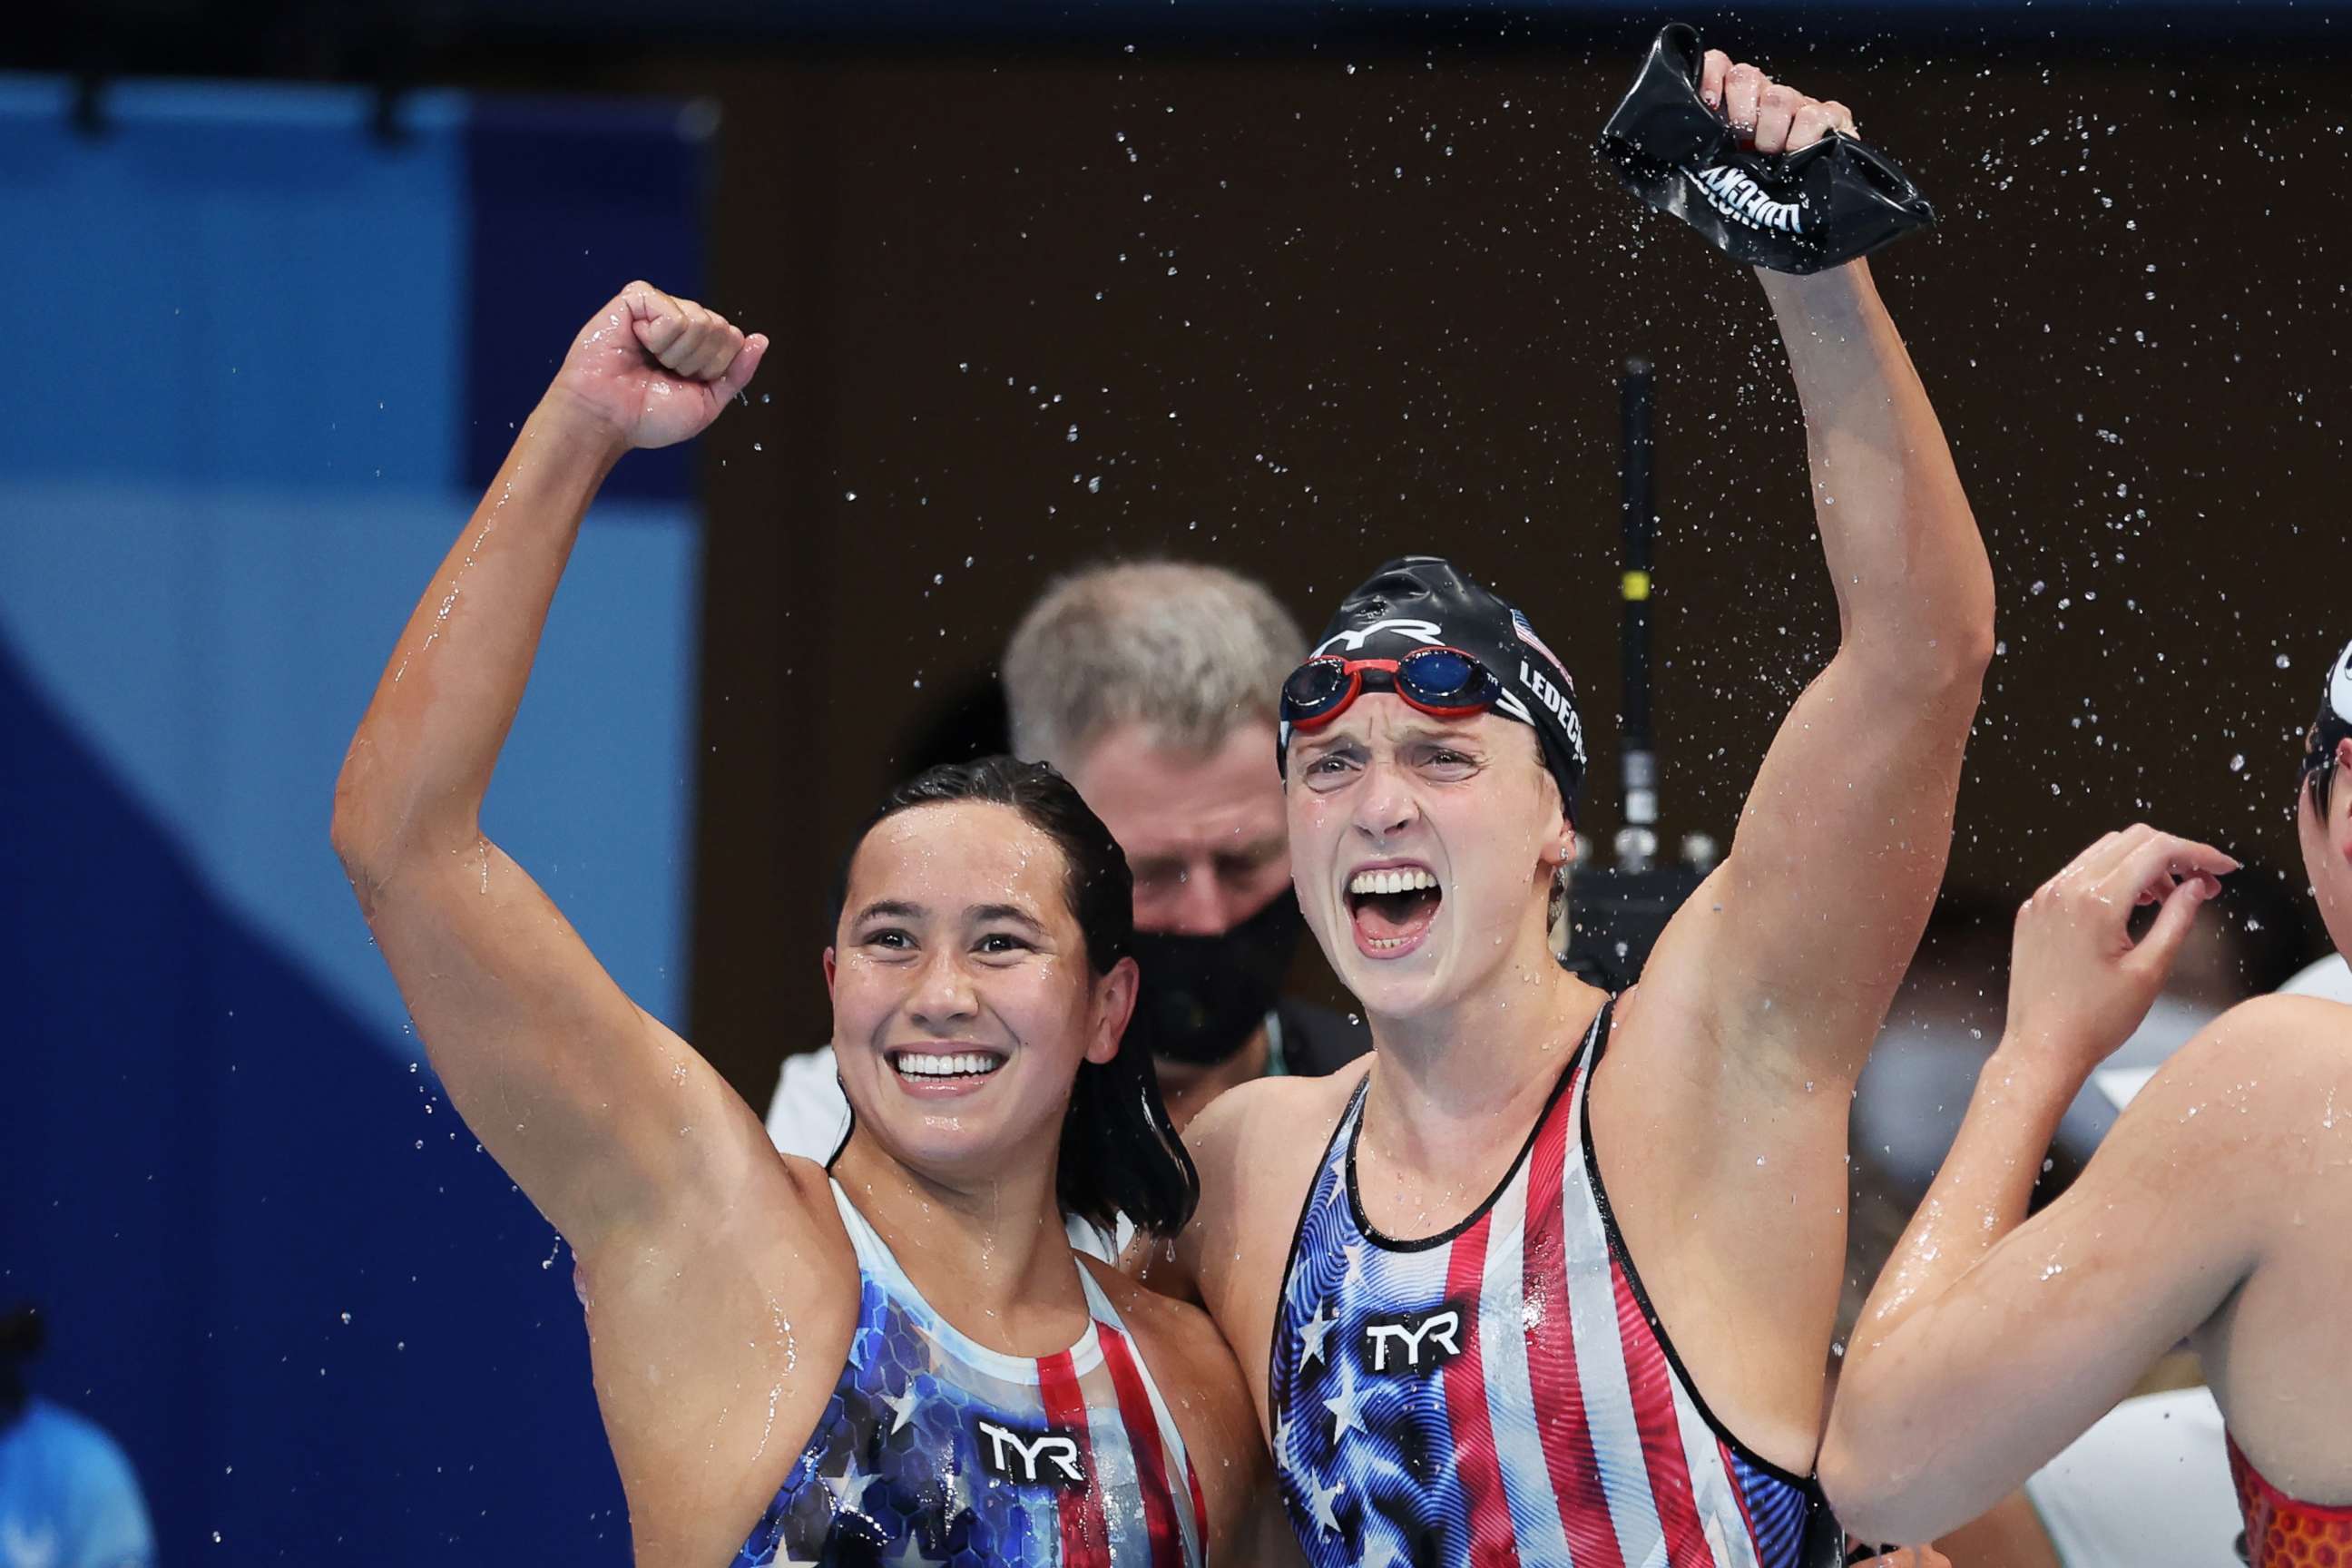 PHOTO: Katie Ledecky of Team United States celebrates with teammate Erica Sullivan after winning the women's 1500m freestyle final on day five of the Tokyo 2020 Olympic Games at Tokyo Aquatics Centre, July 28, 2021 in Tokyo, Japan.